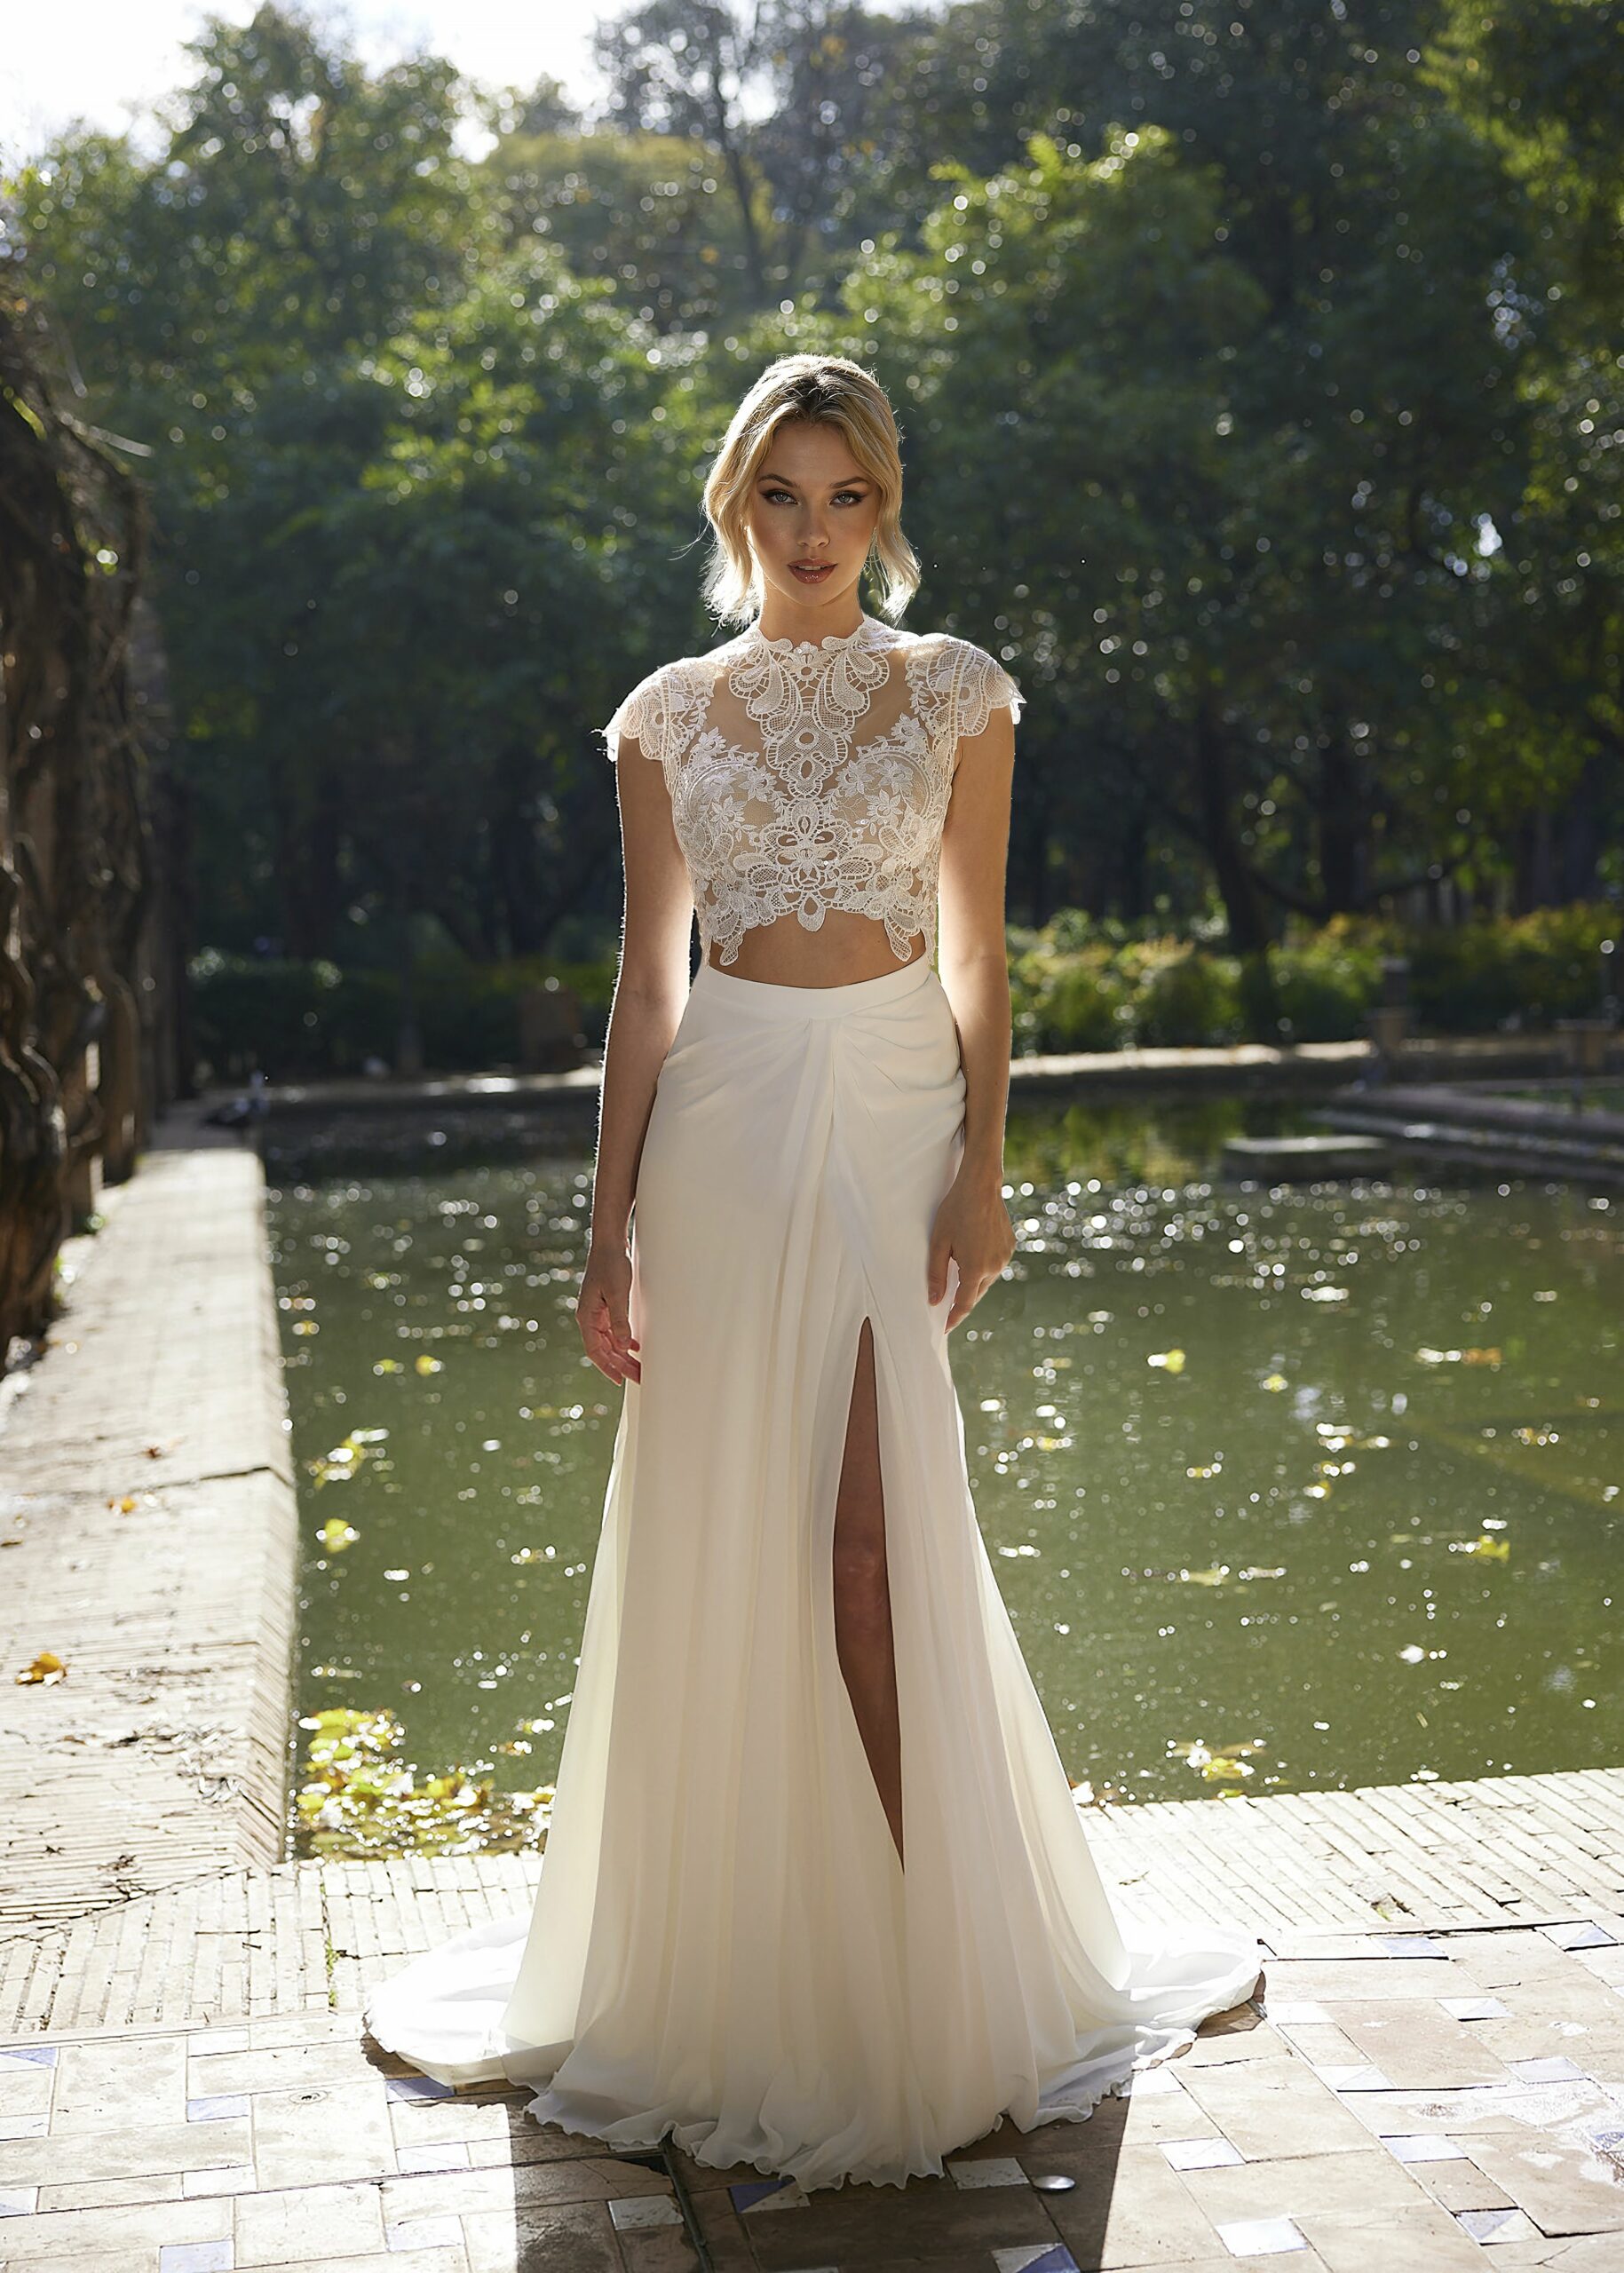 Libelle Bridal Izzie top from their Innocent Collection paired with Iris skirt, front view